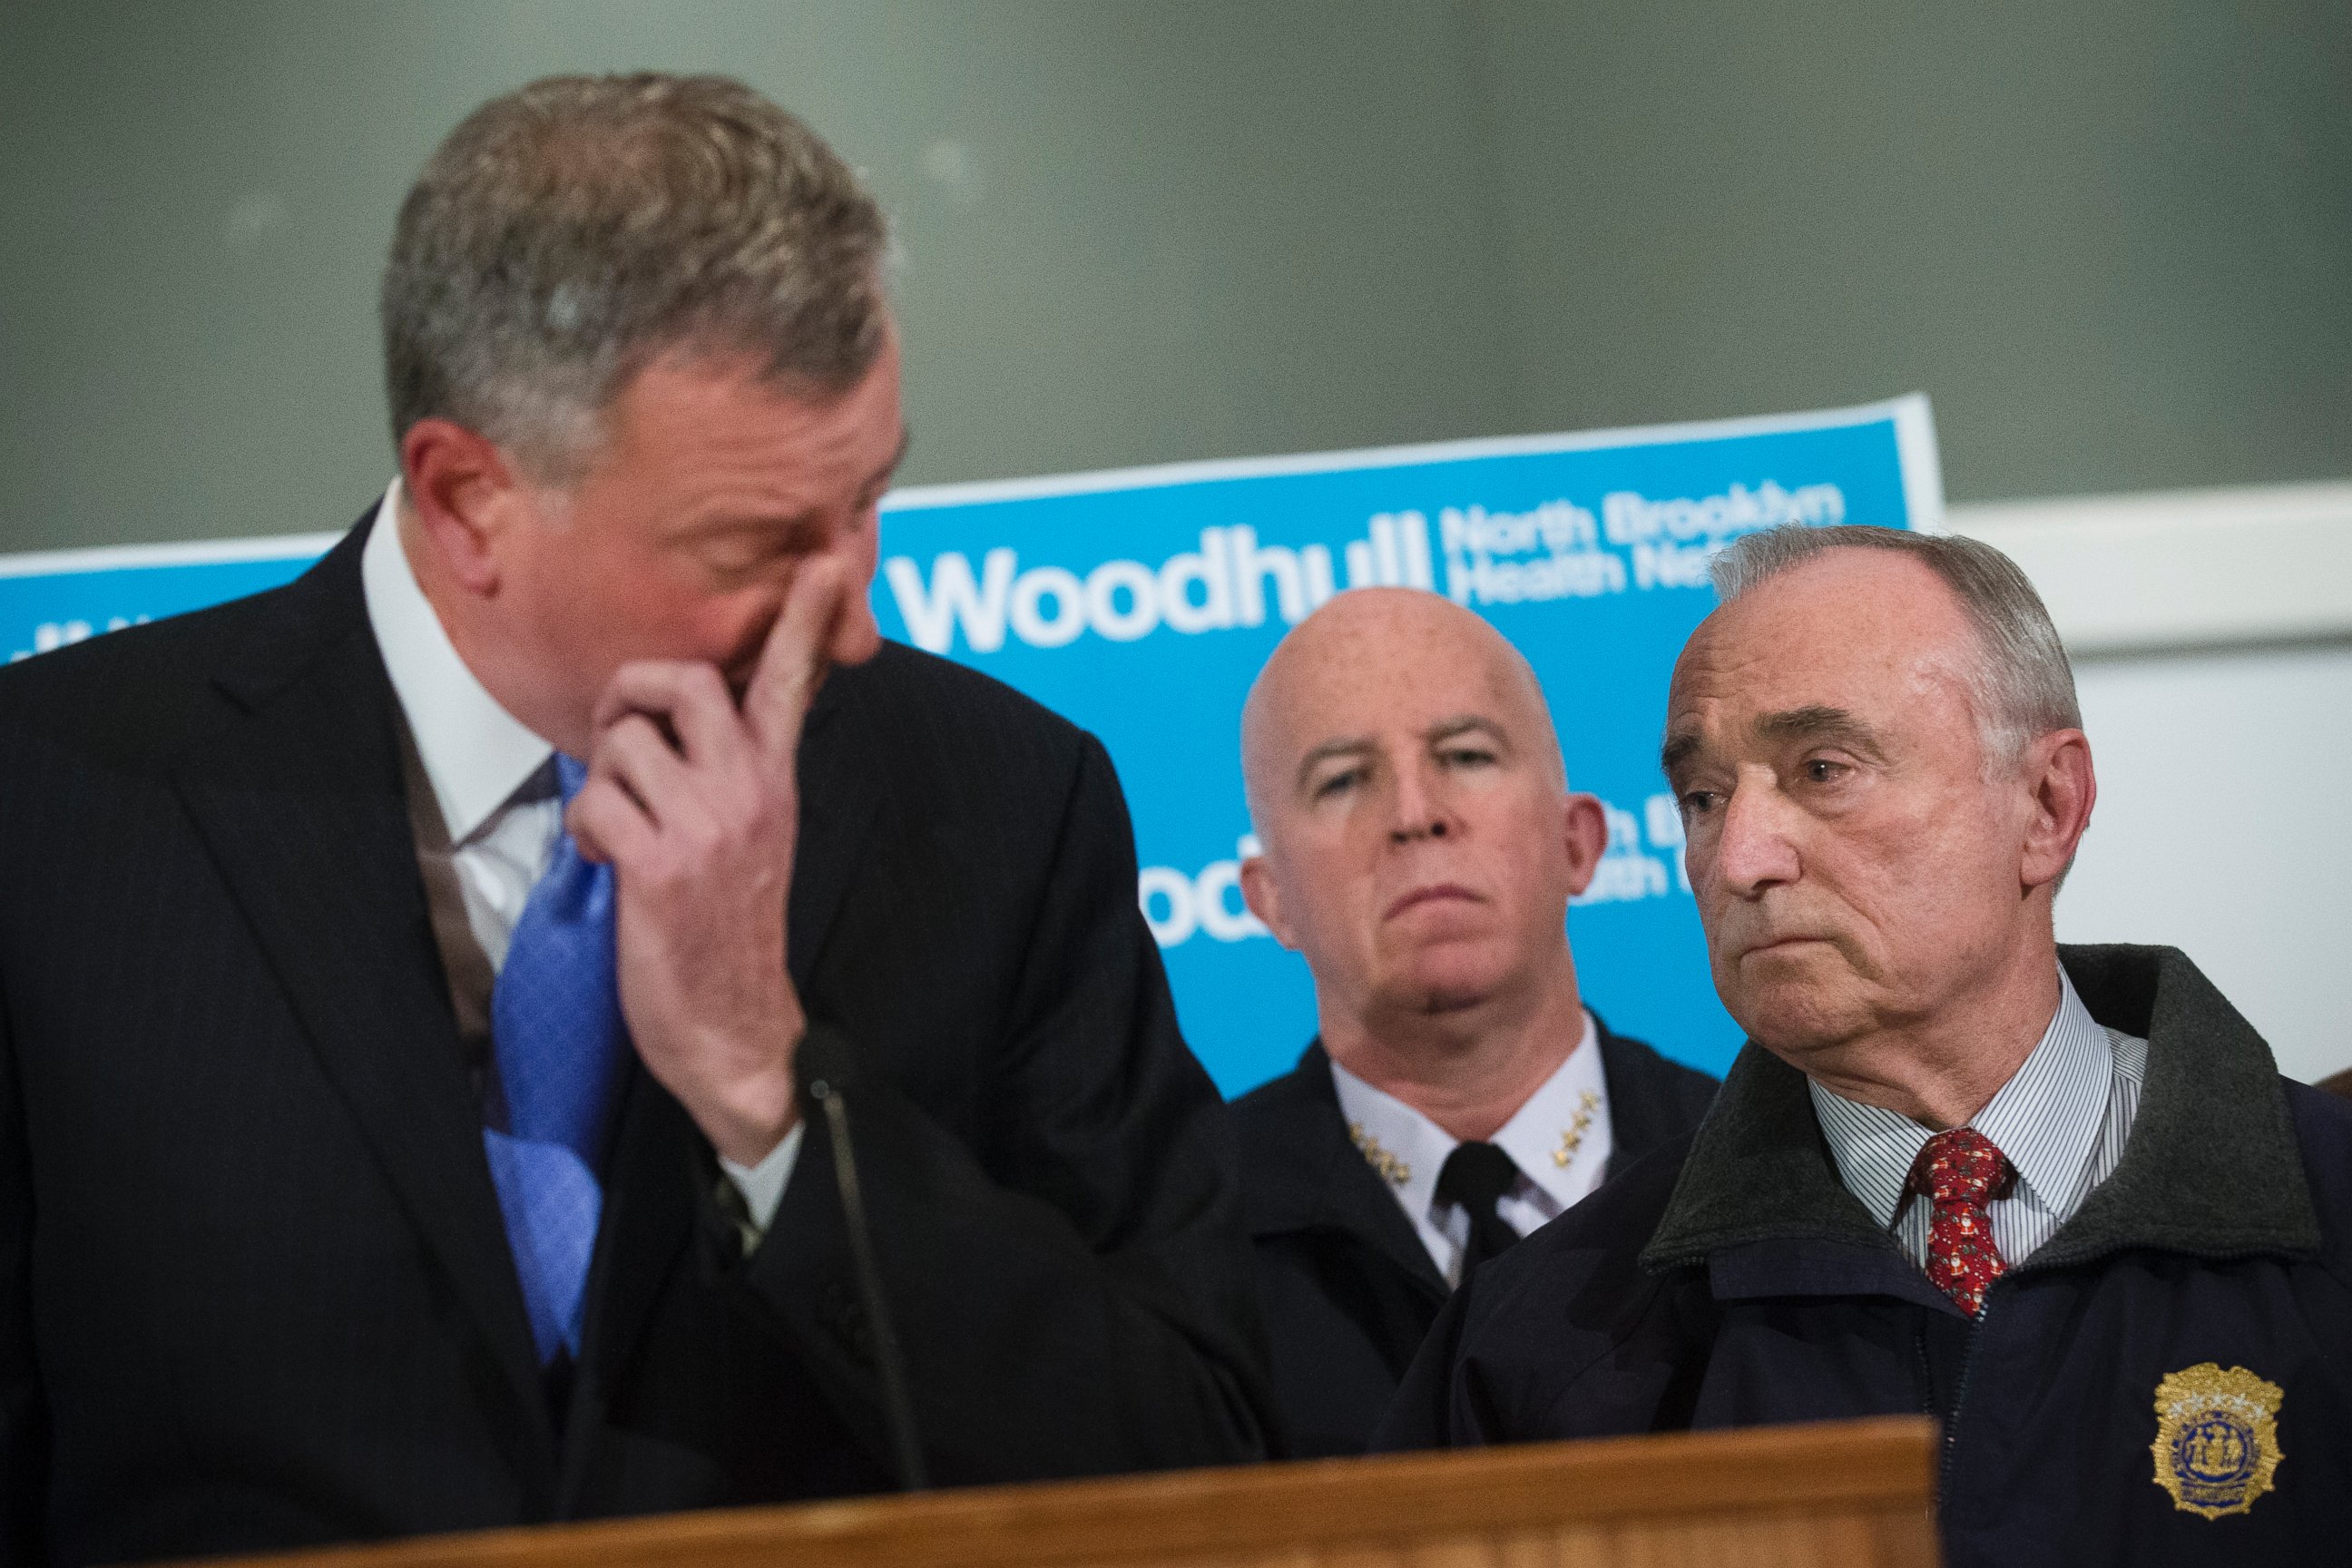 PHOTO: NYPD Commissioner Bill Bratton, right, stands beside Mayor Bill de Blasio as he wipes his eye during a news conference at Woodhull Medical Center, Saturday, Dec. 20, 2014, in New York.